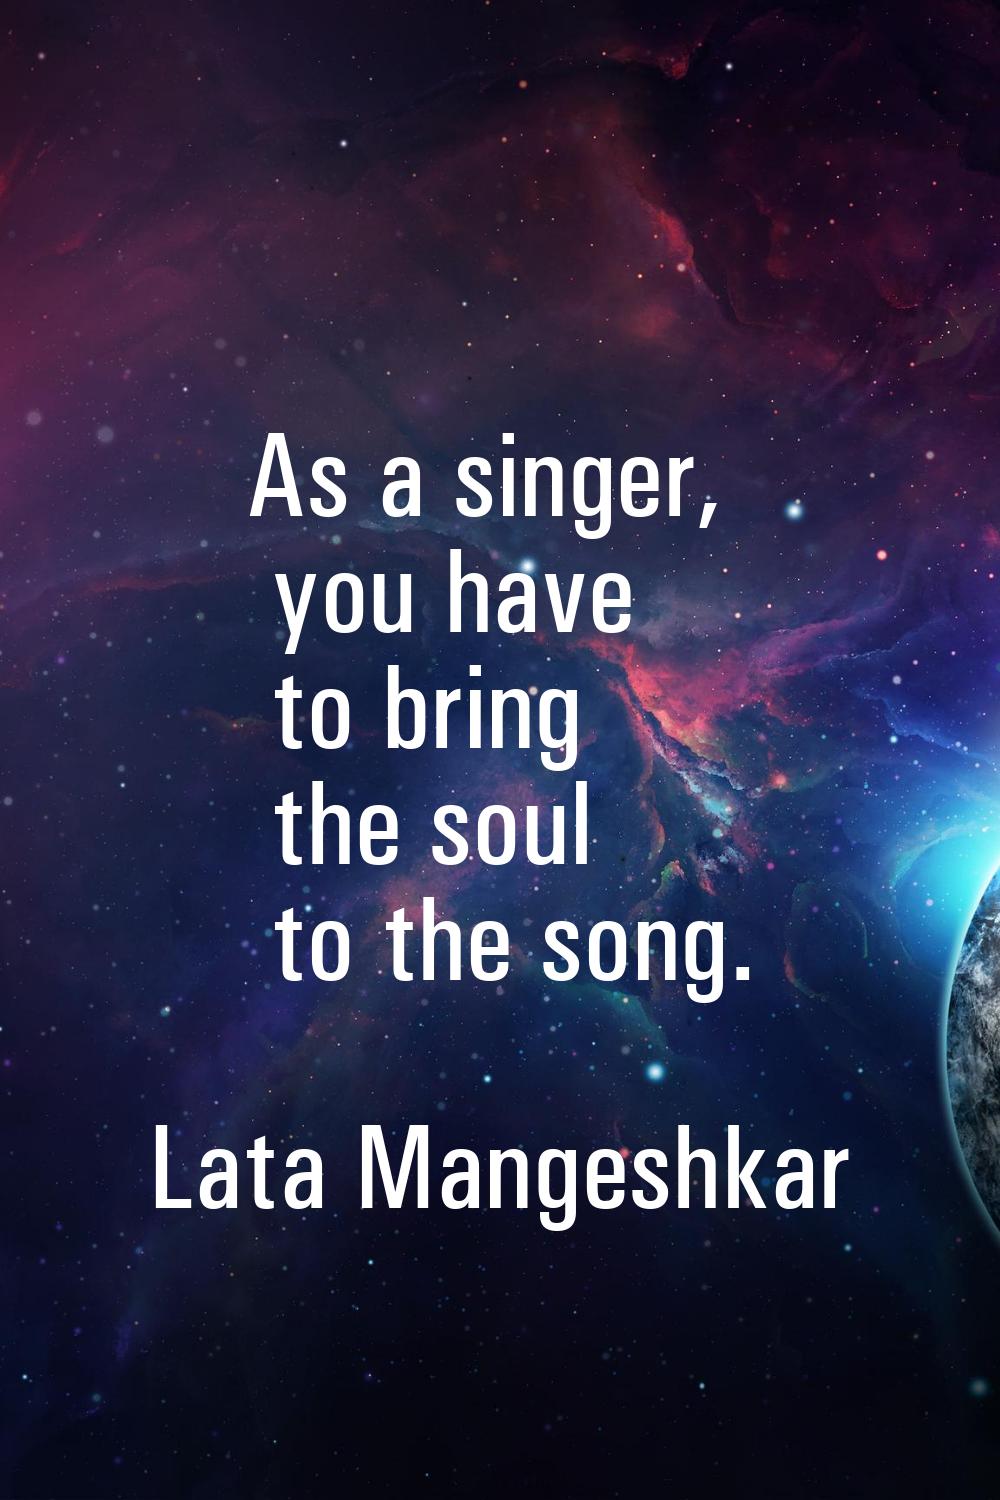 As a singer, you have to bring the soul to the song.